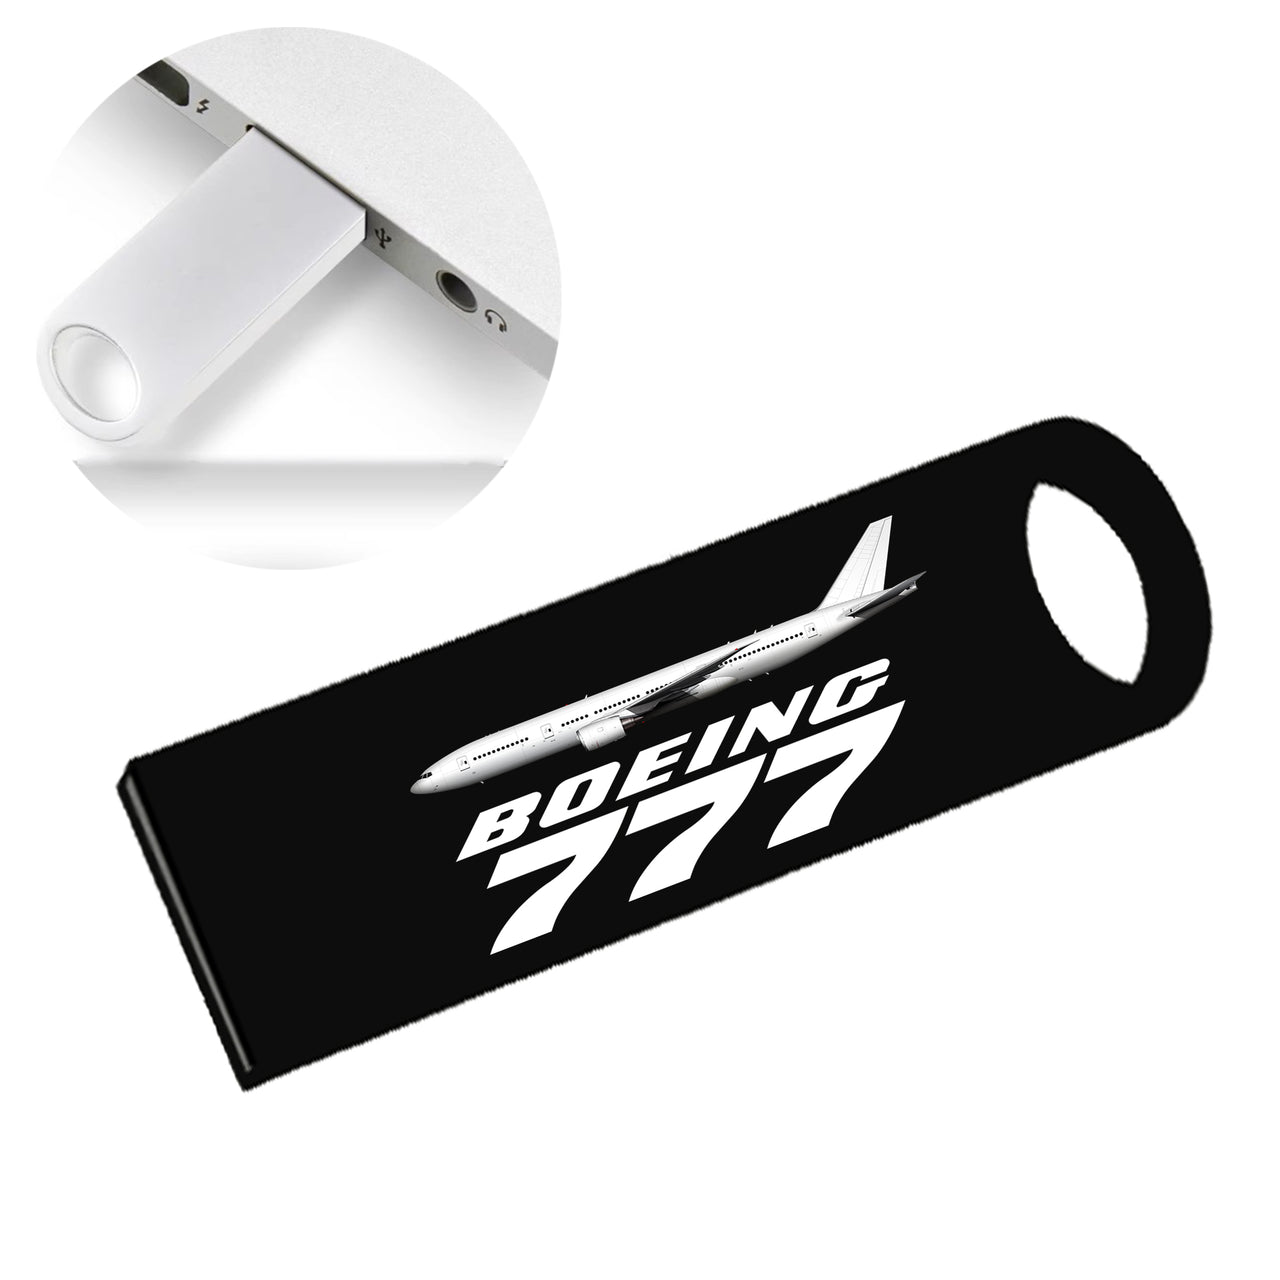 The Boeing 777 Designed Waterproof USB Devices